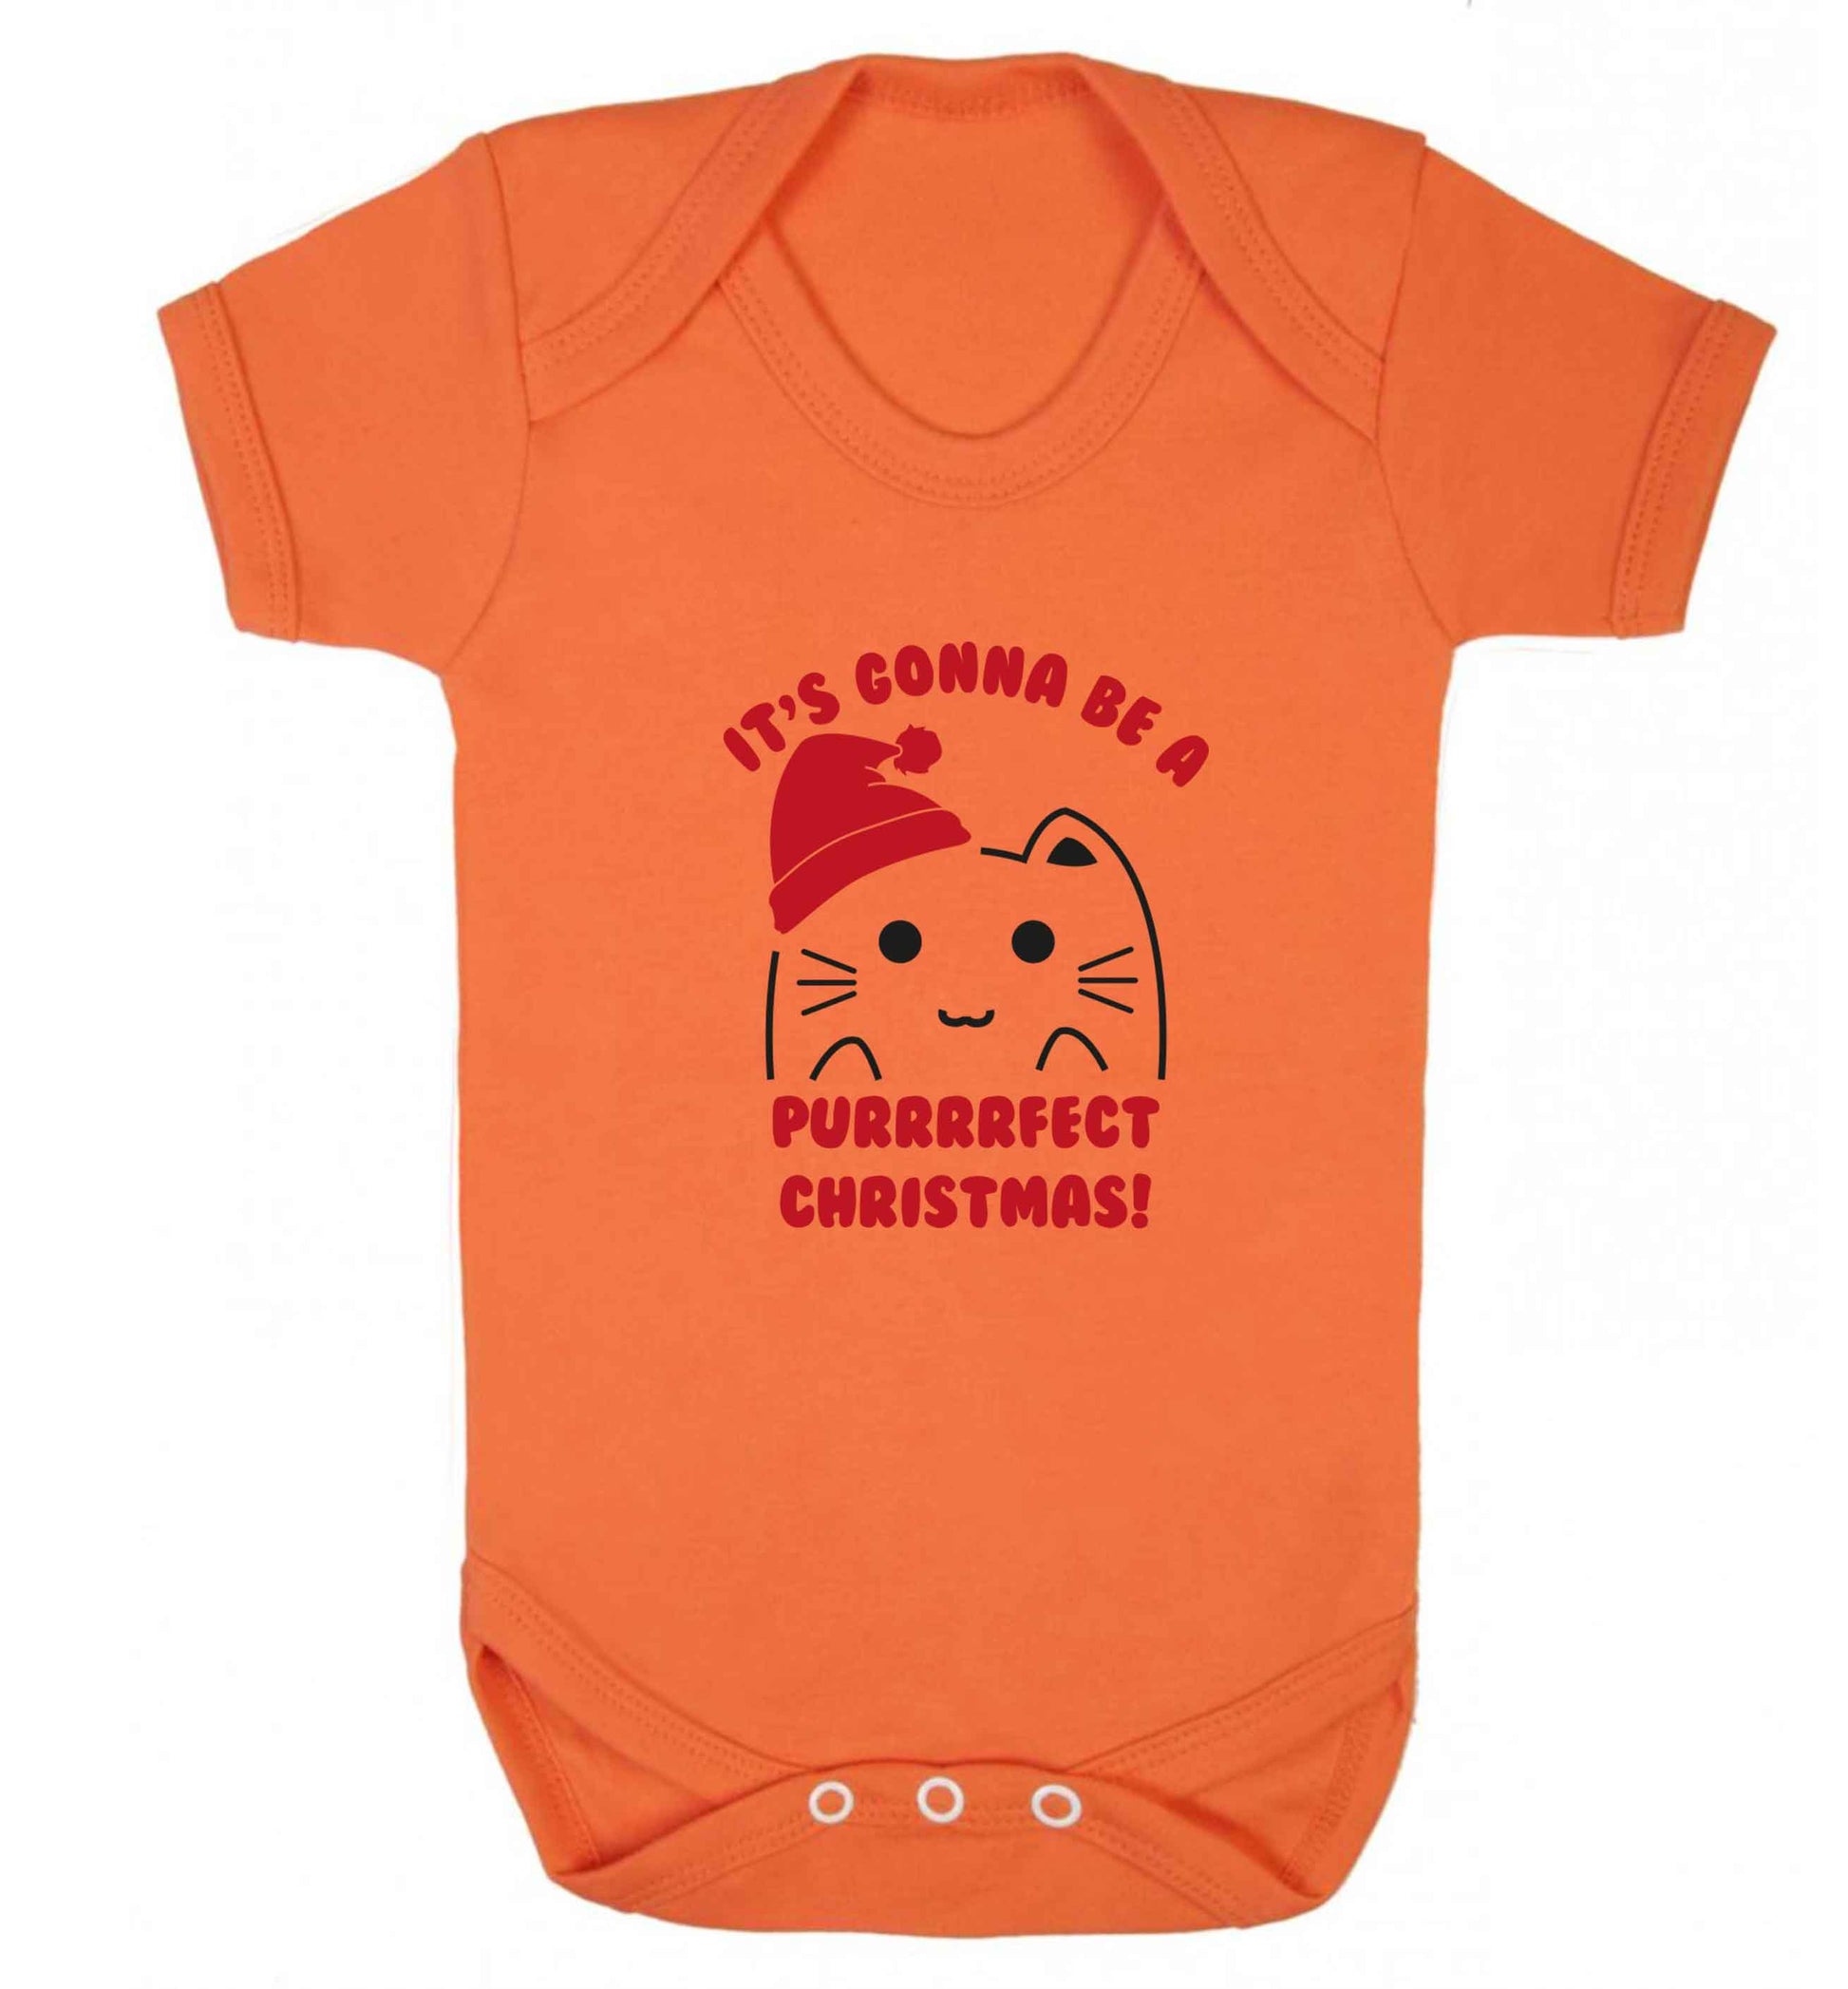 It's going to be a purrfect Christmas baby vest orange 18-24 months